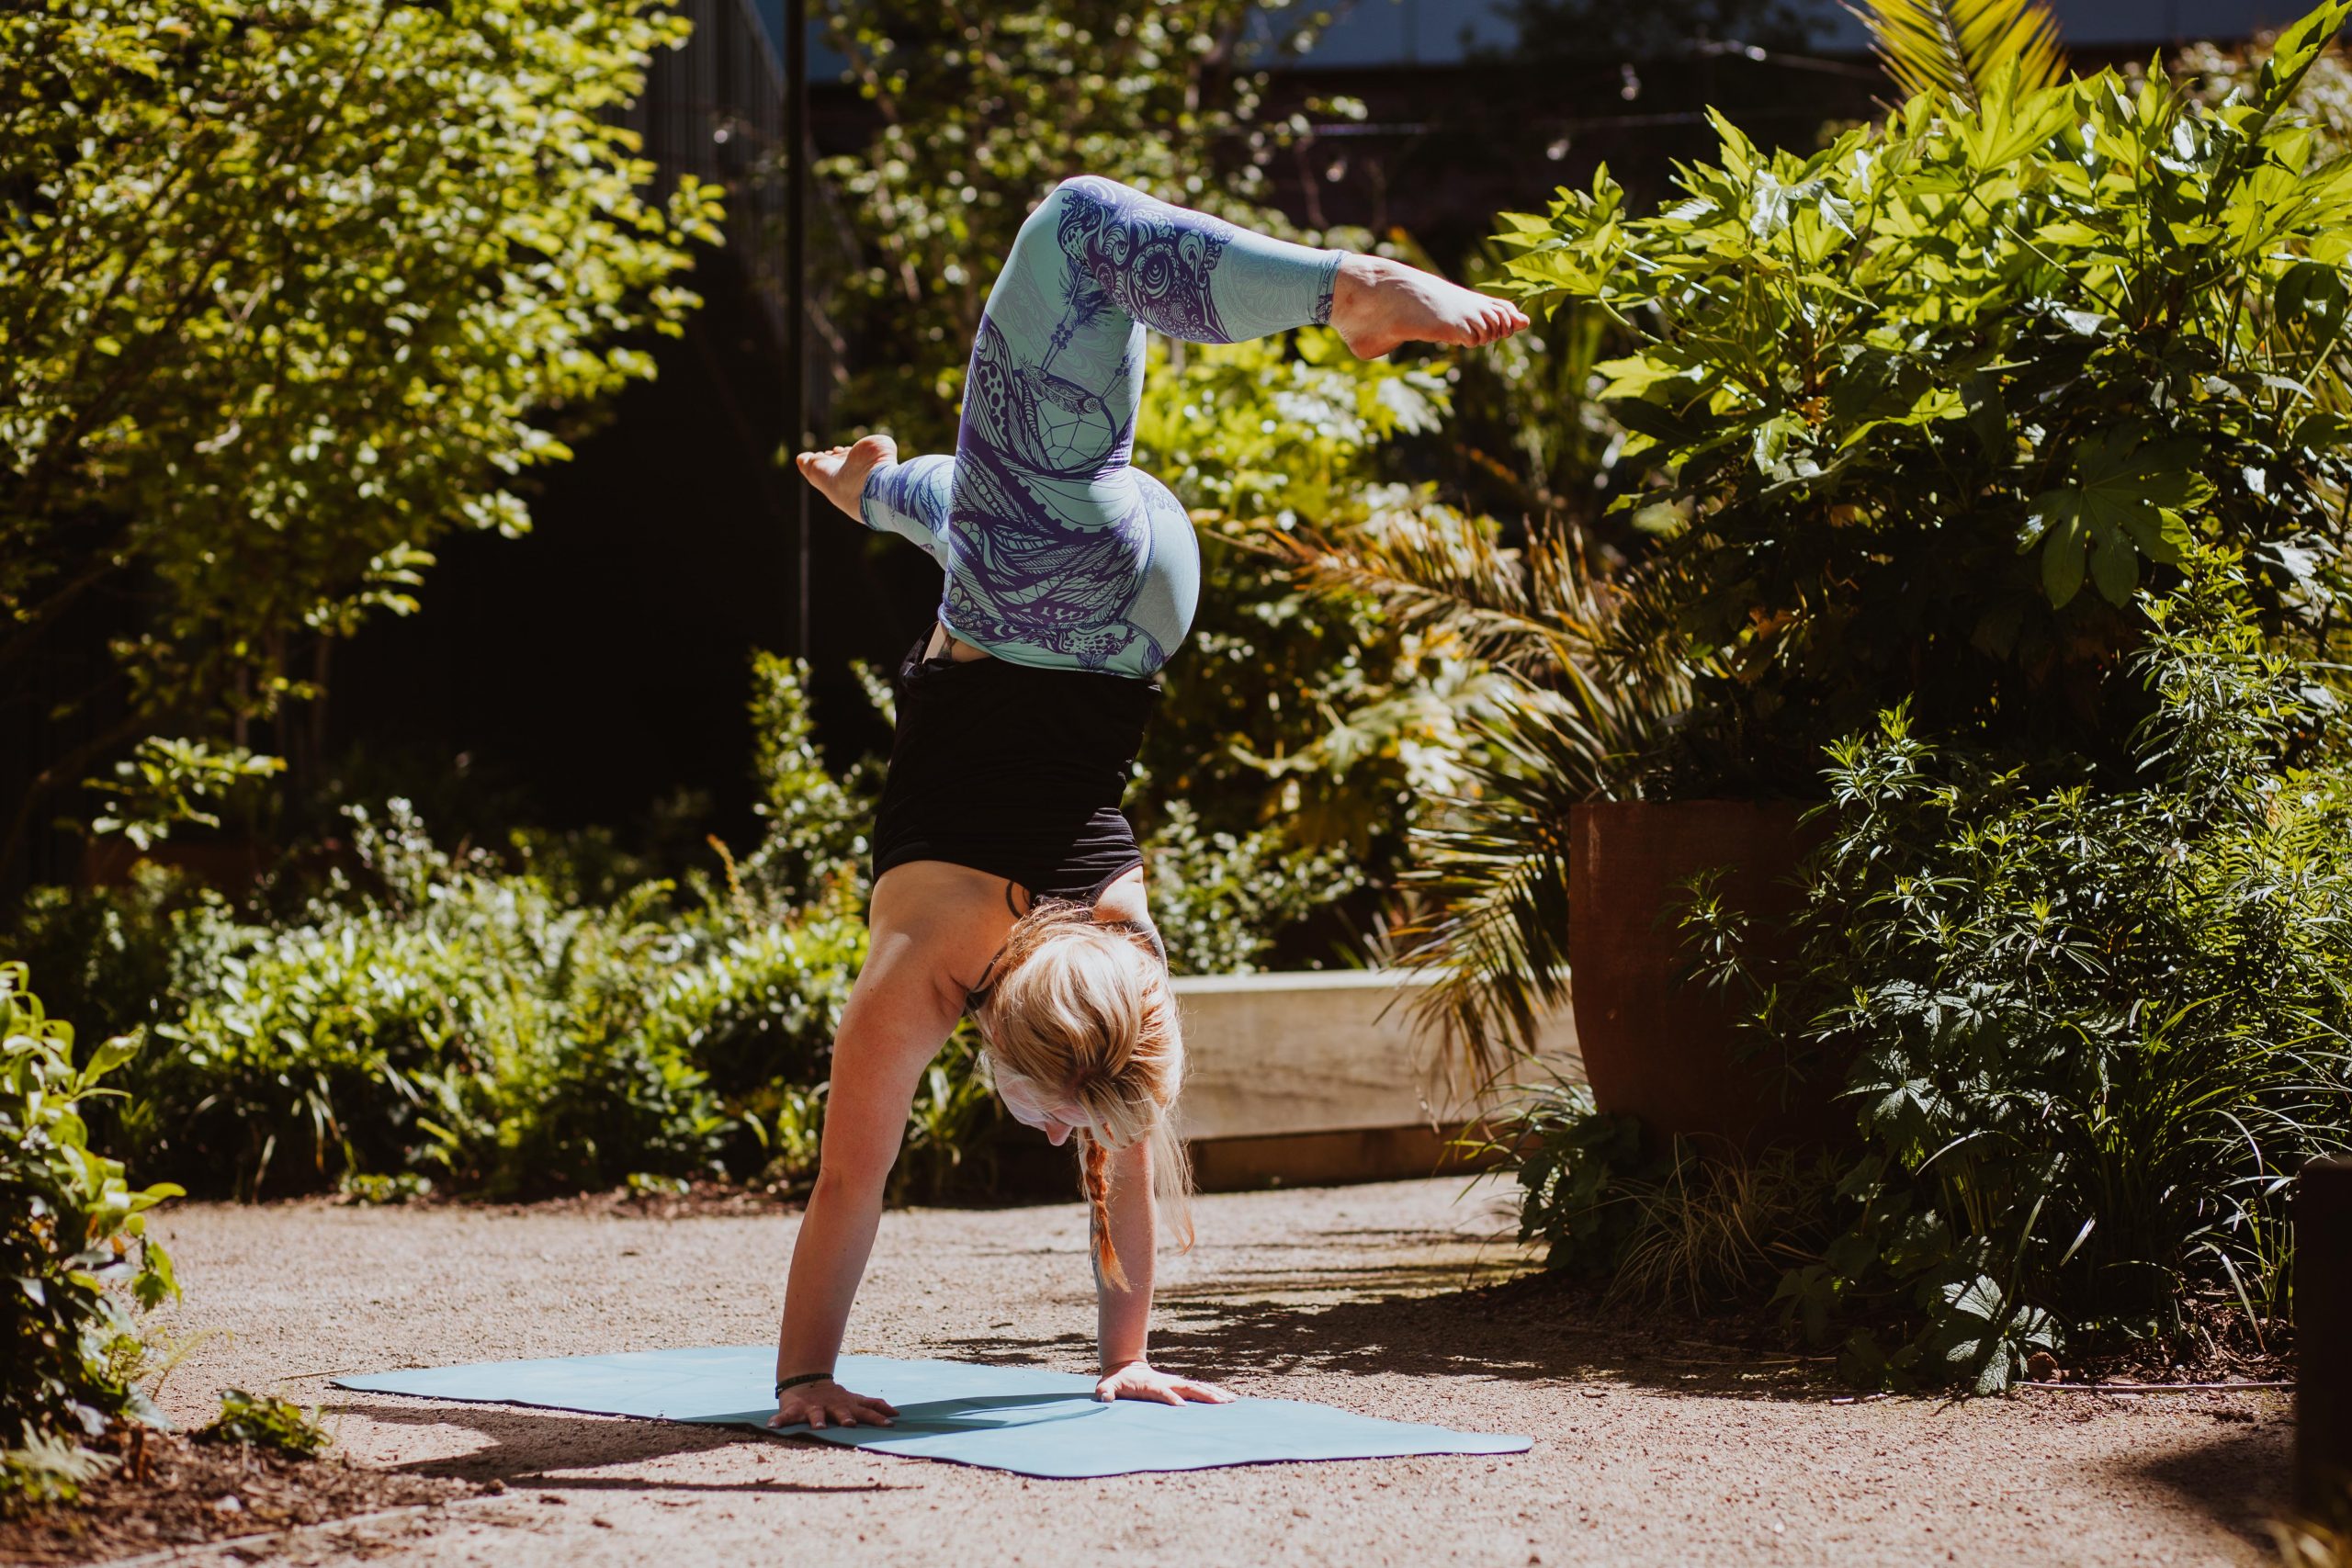 A woman perfoming a handstand yoga pose outside.